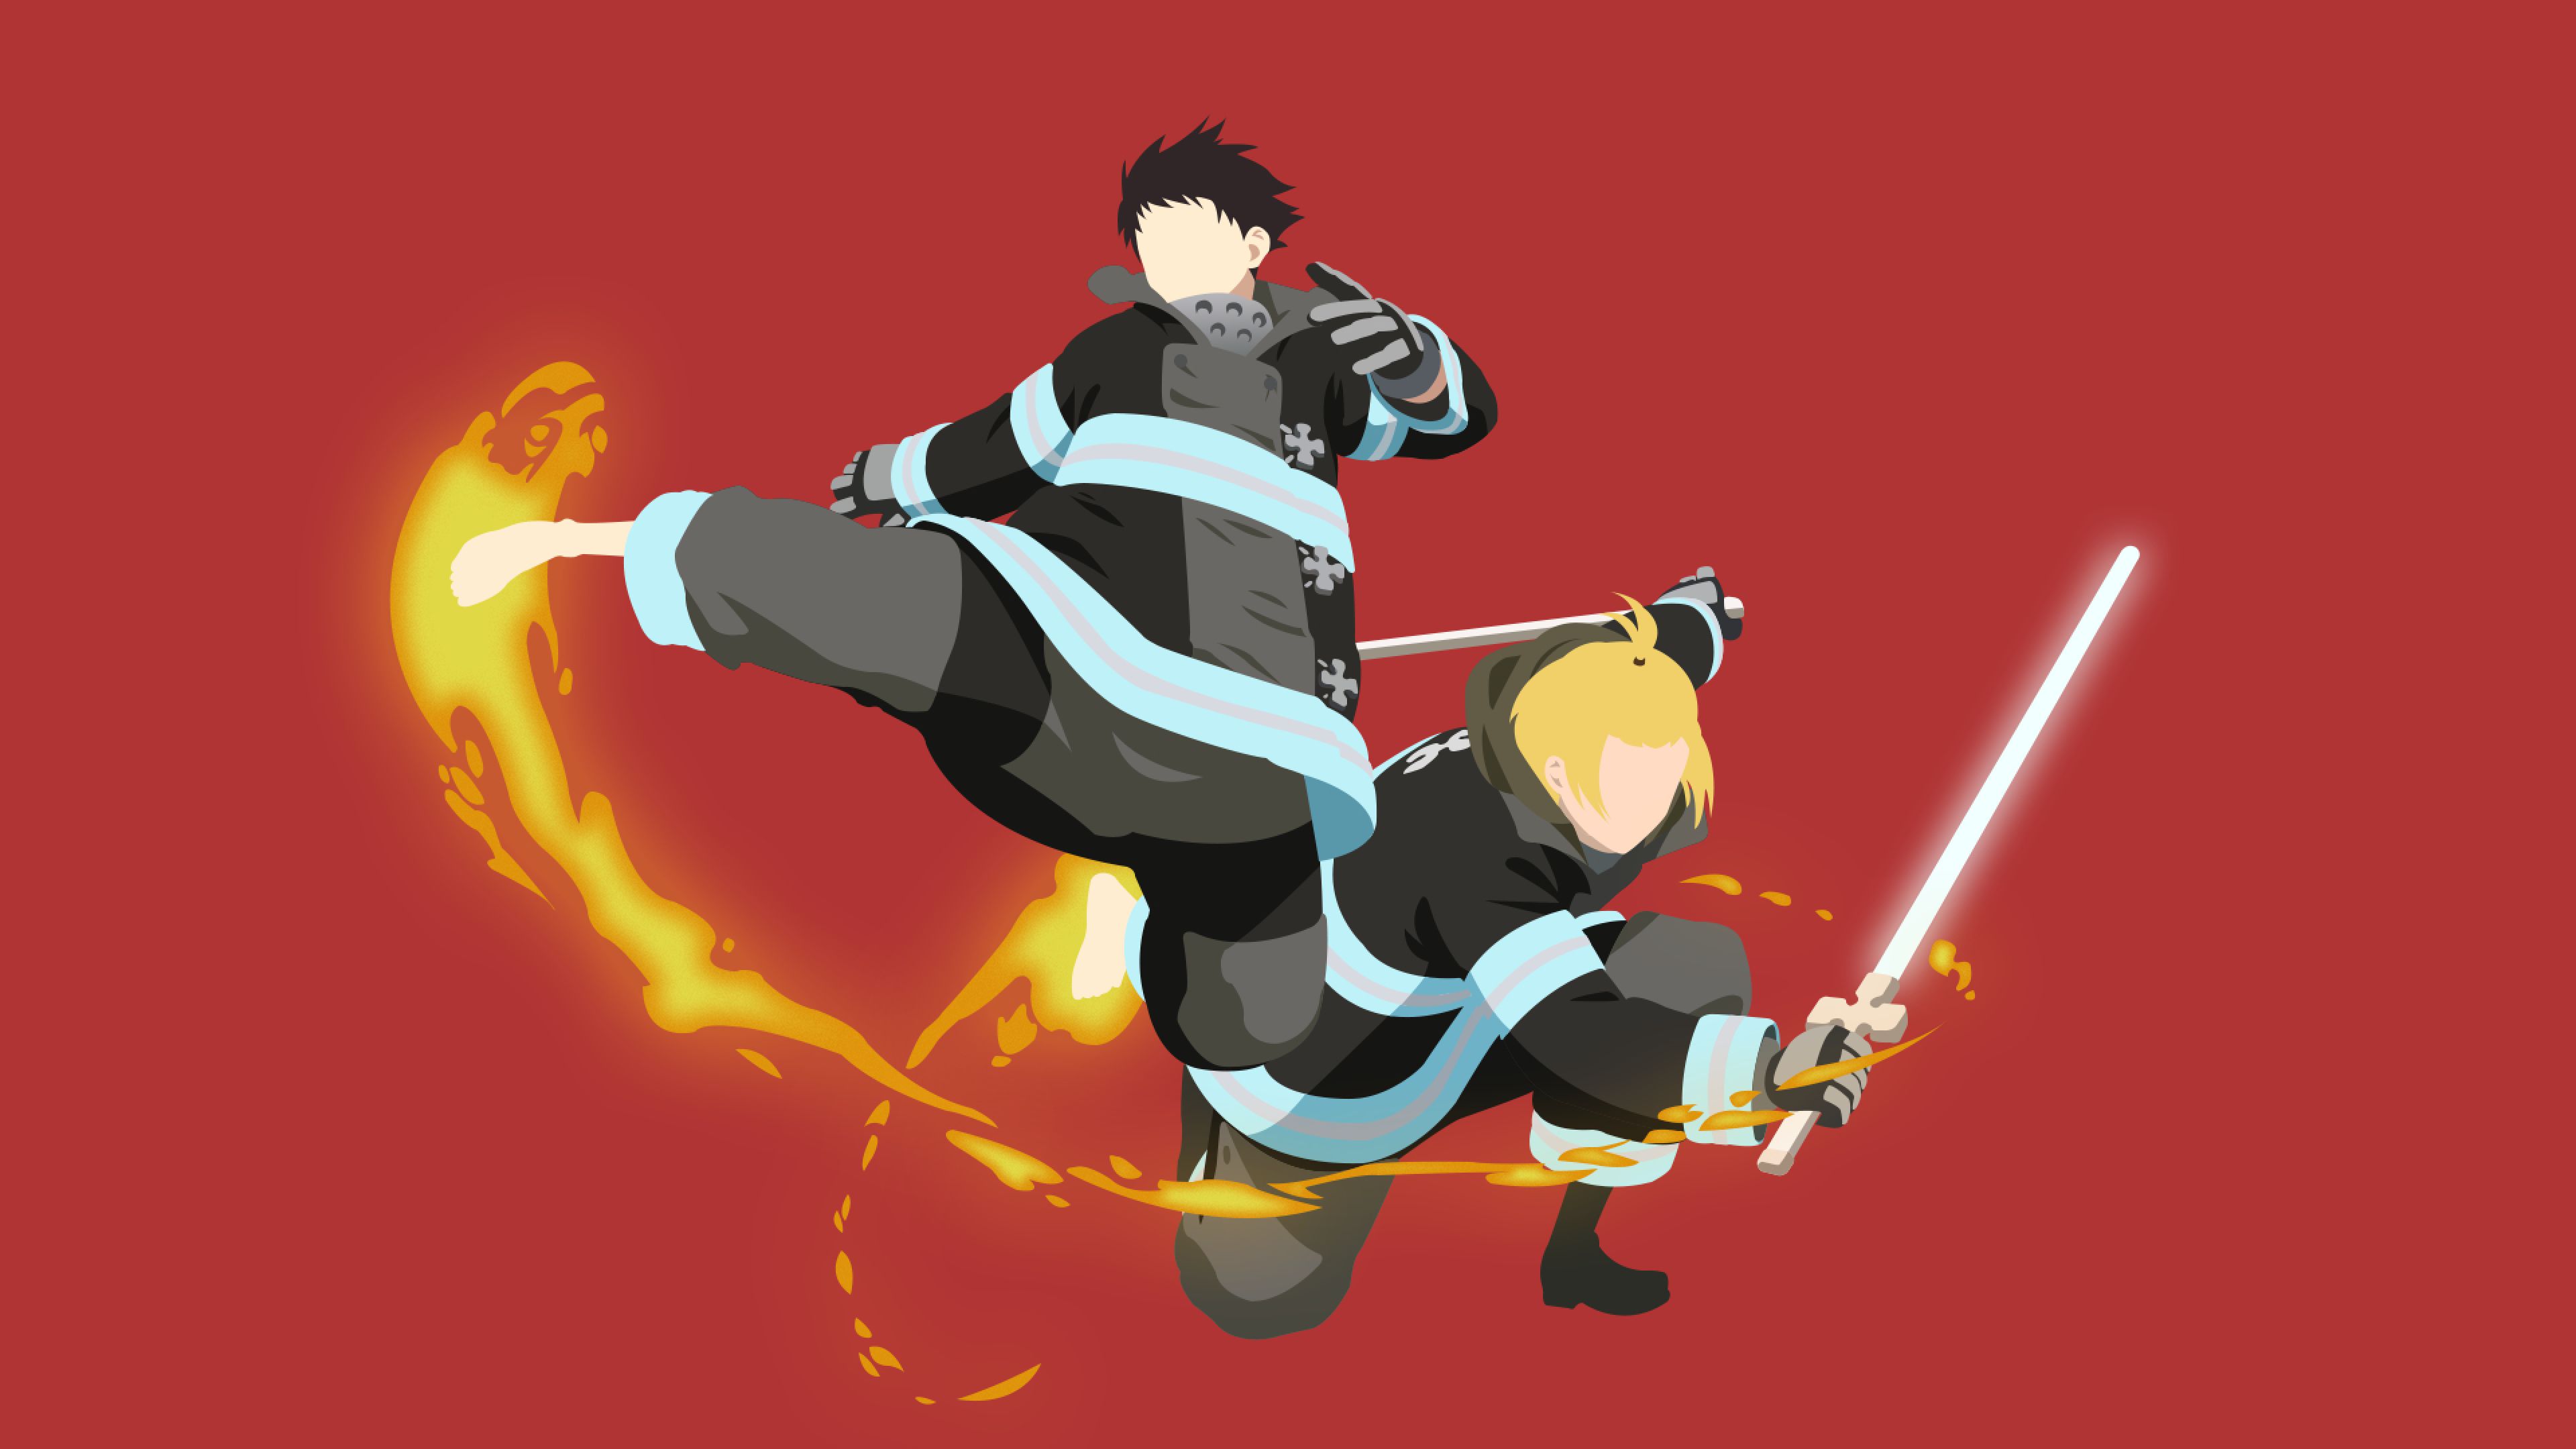 Fire Force Anime 4K Wallpaper, HD Minimalist 4K Wallpaper, Image, Photo and Background